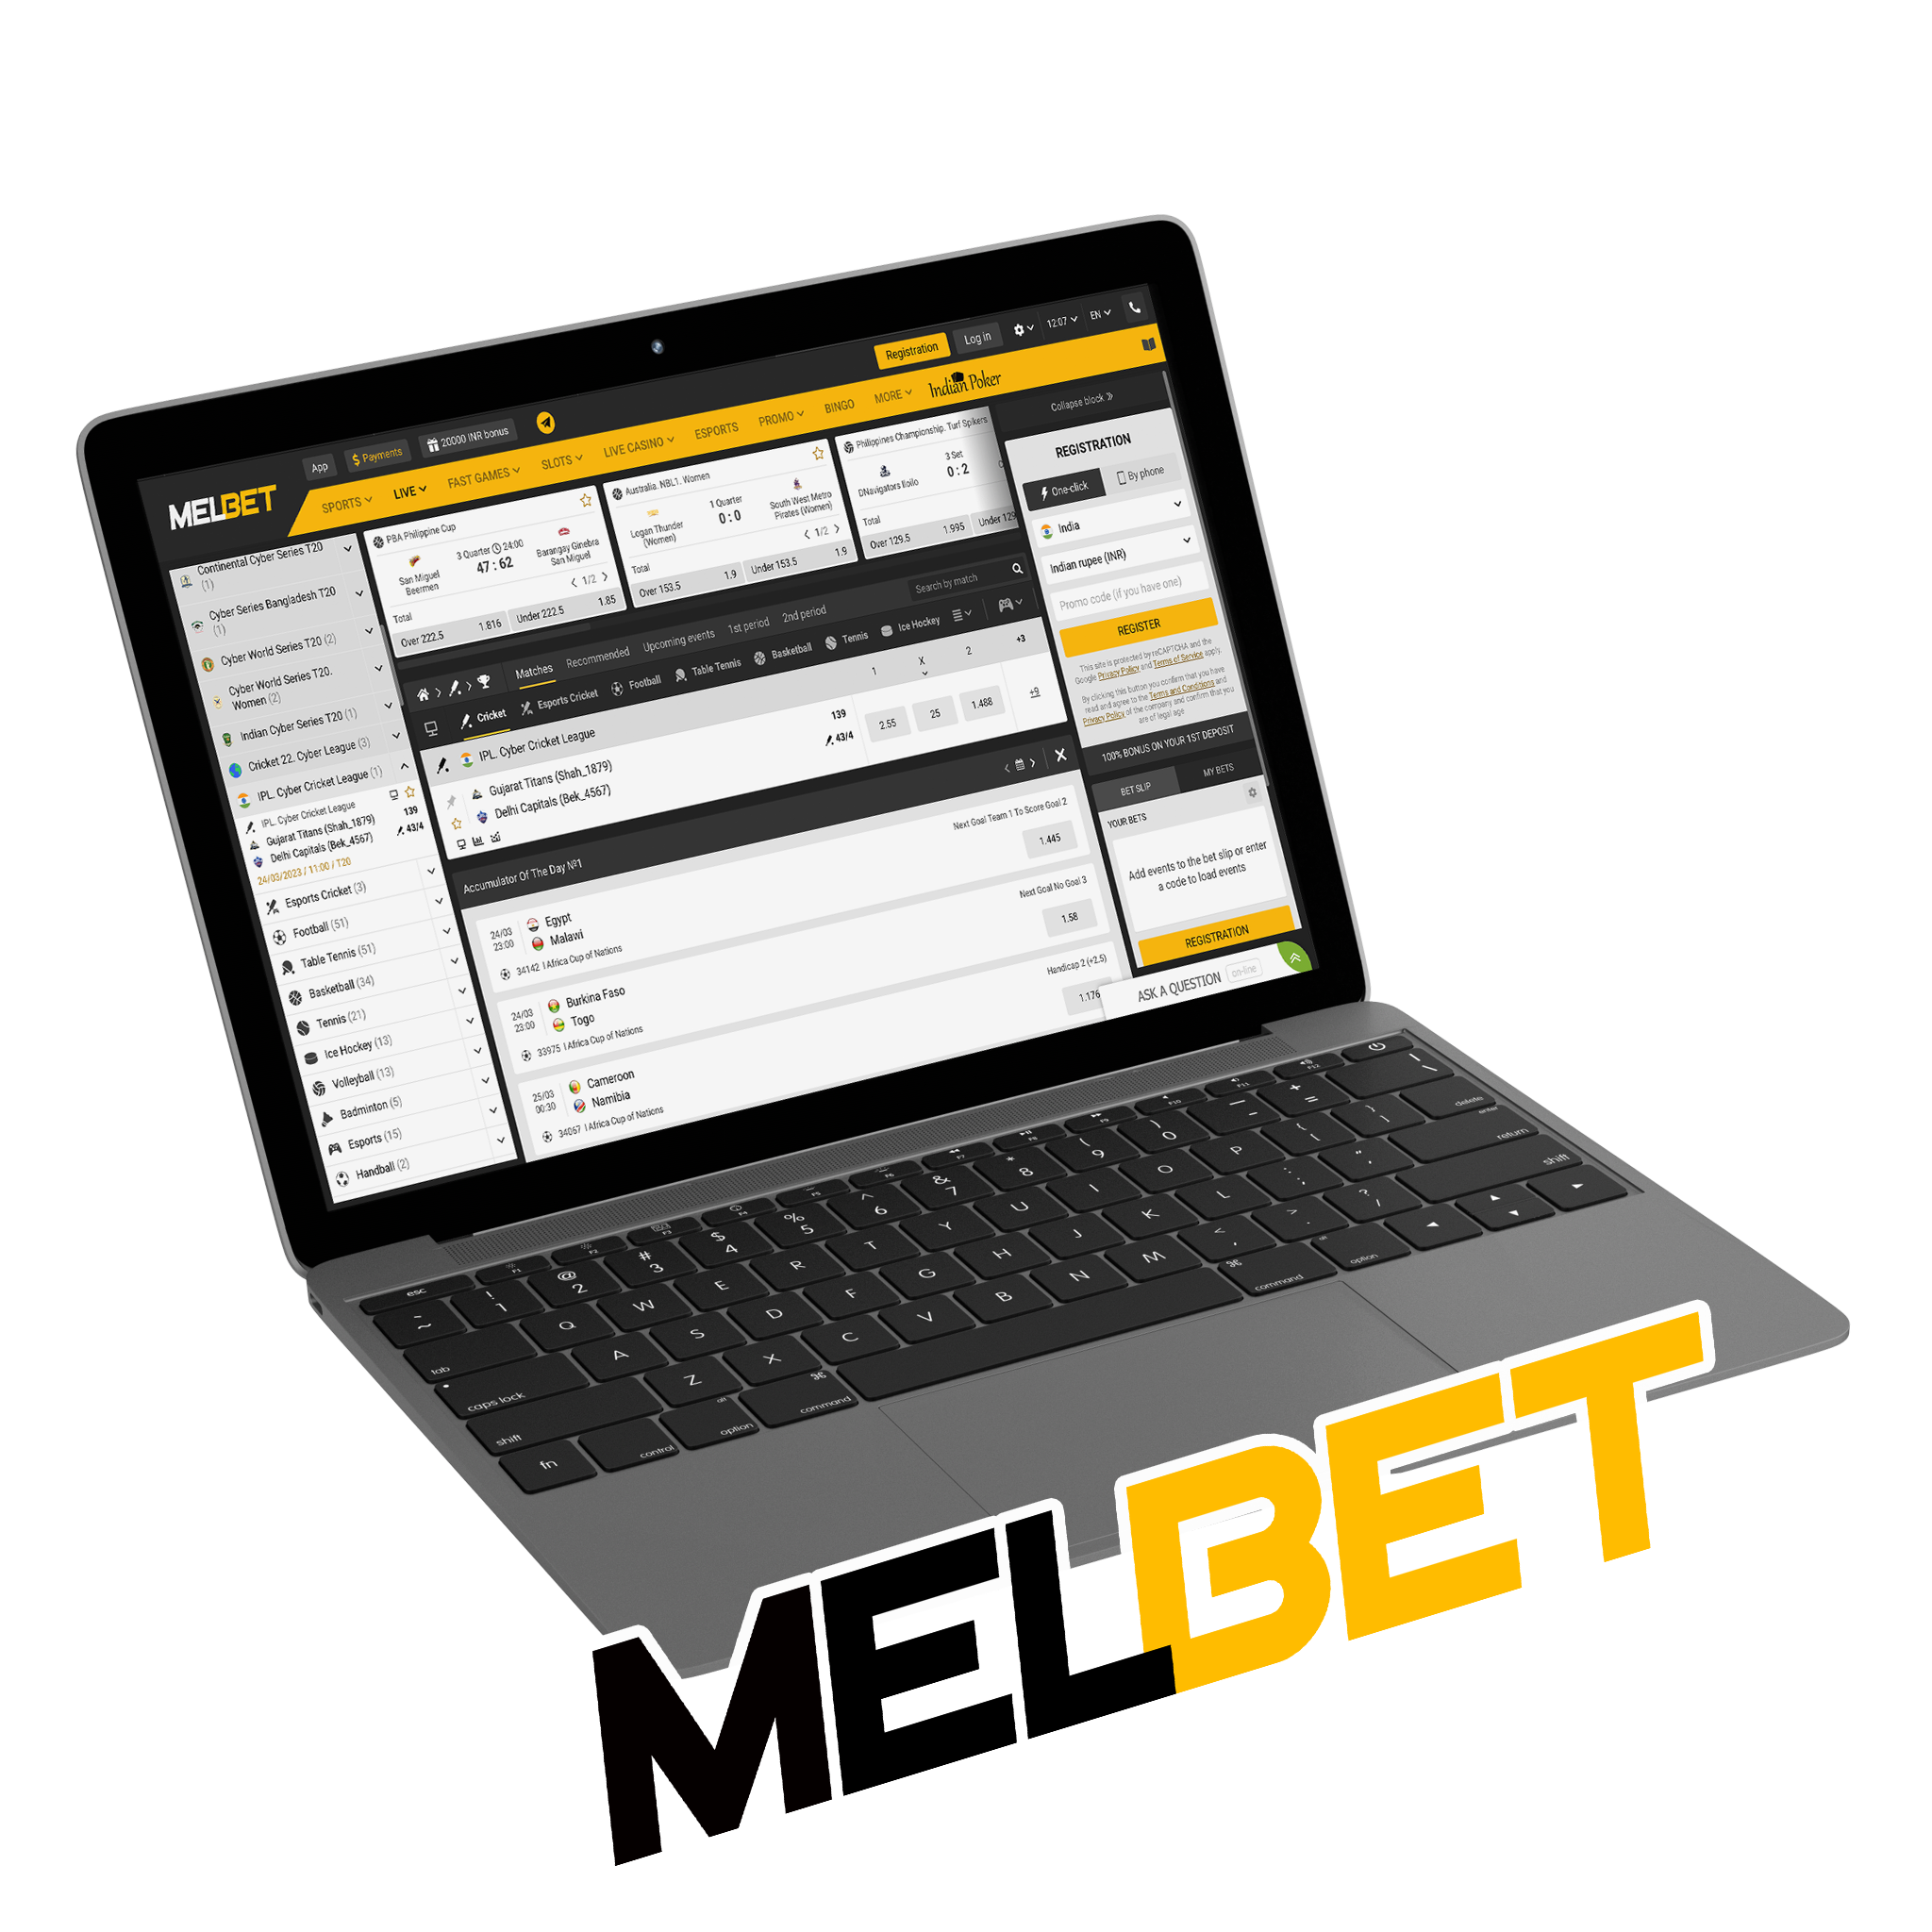 On Melbet you find many IPL cricket events available for betting.